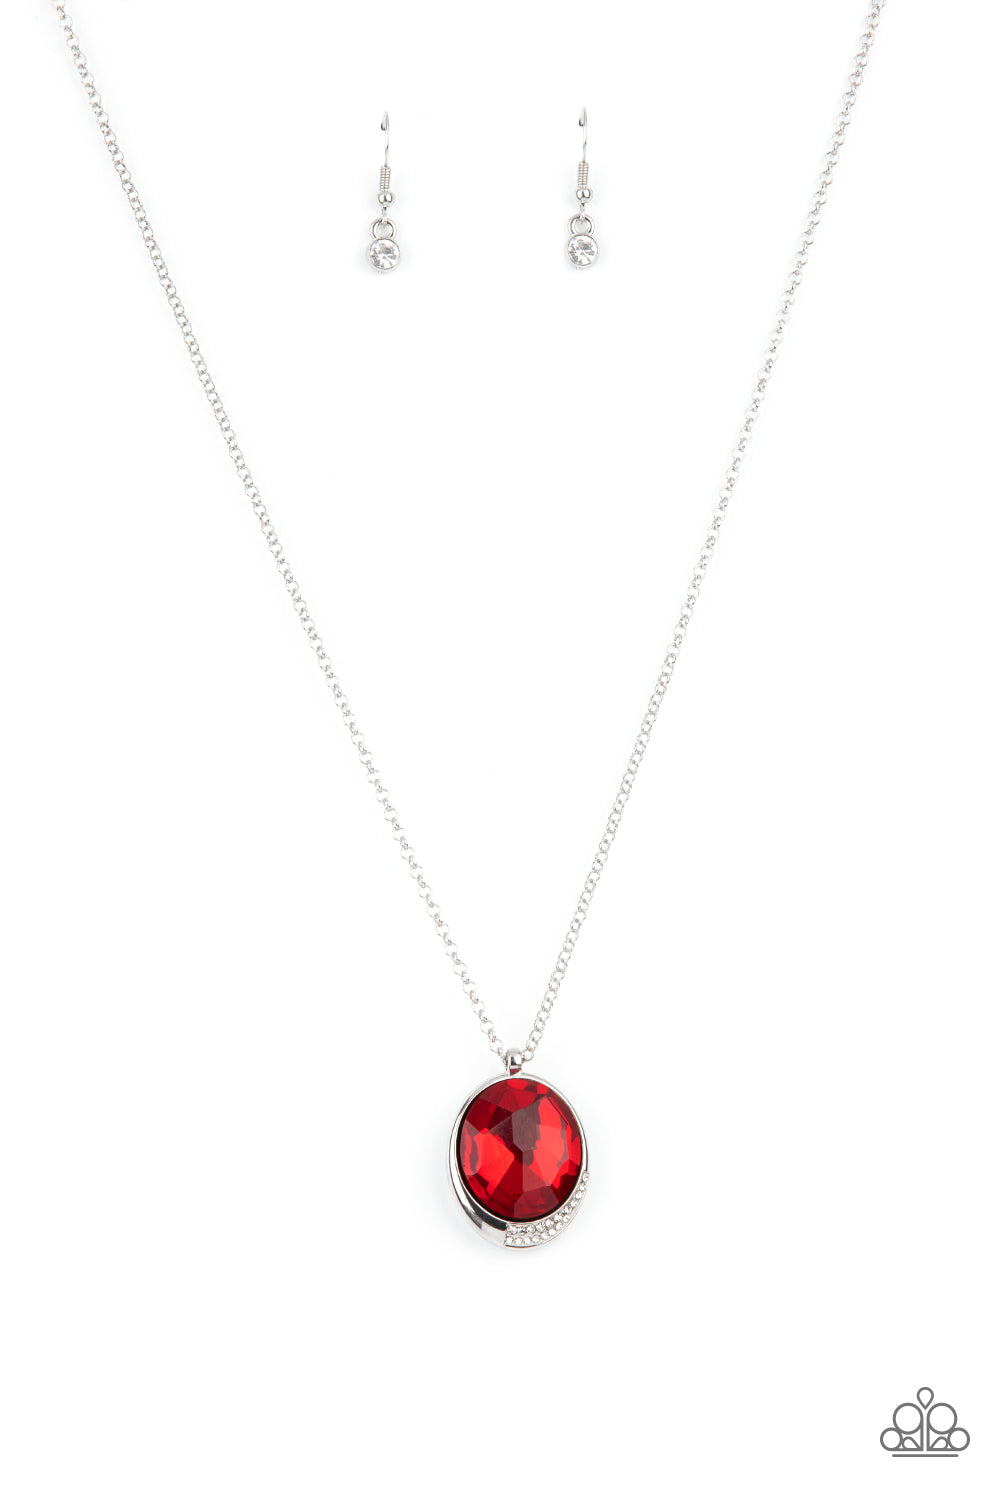 Paparazzi Necklace - Fashion Finale - Red